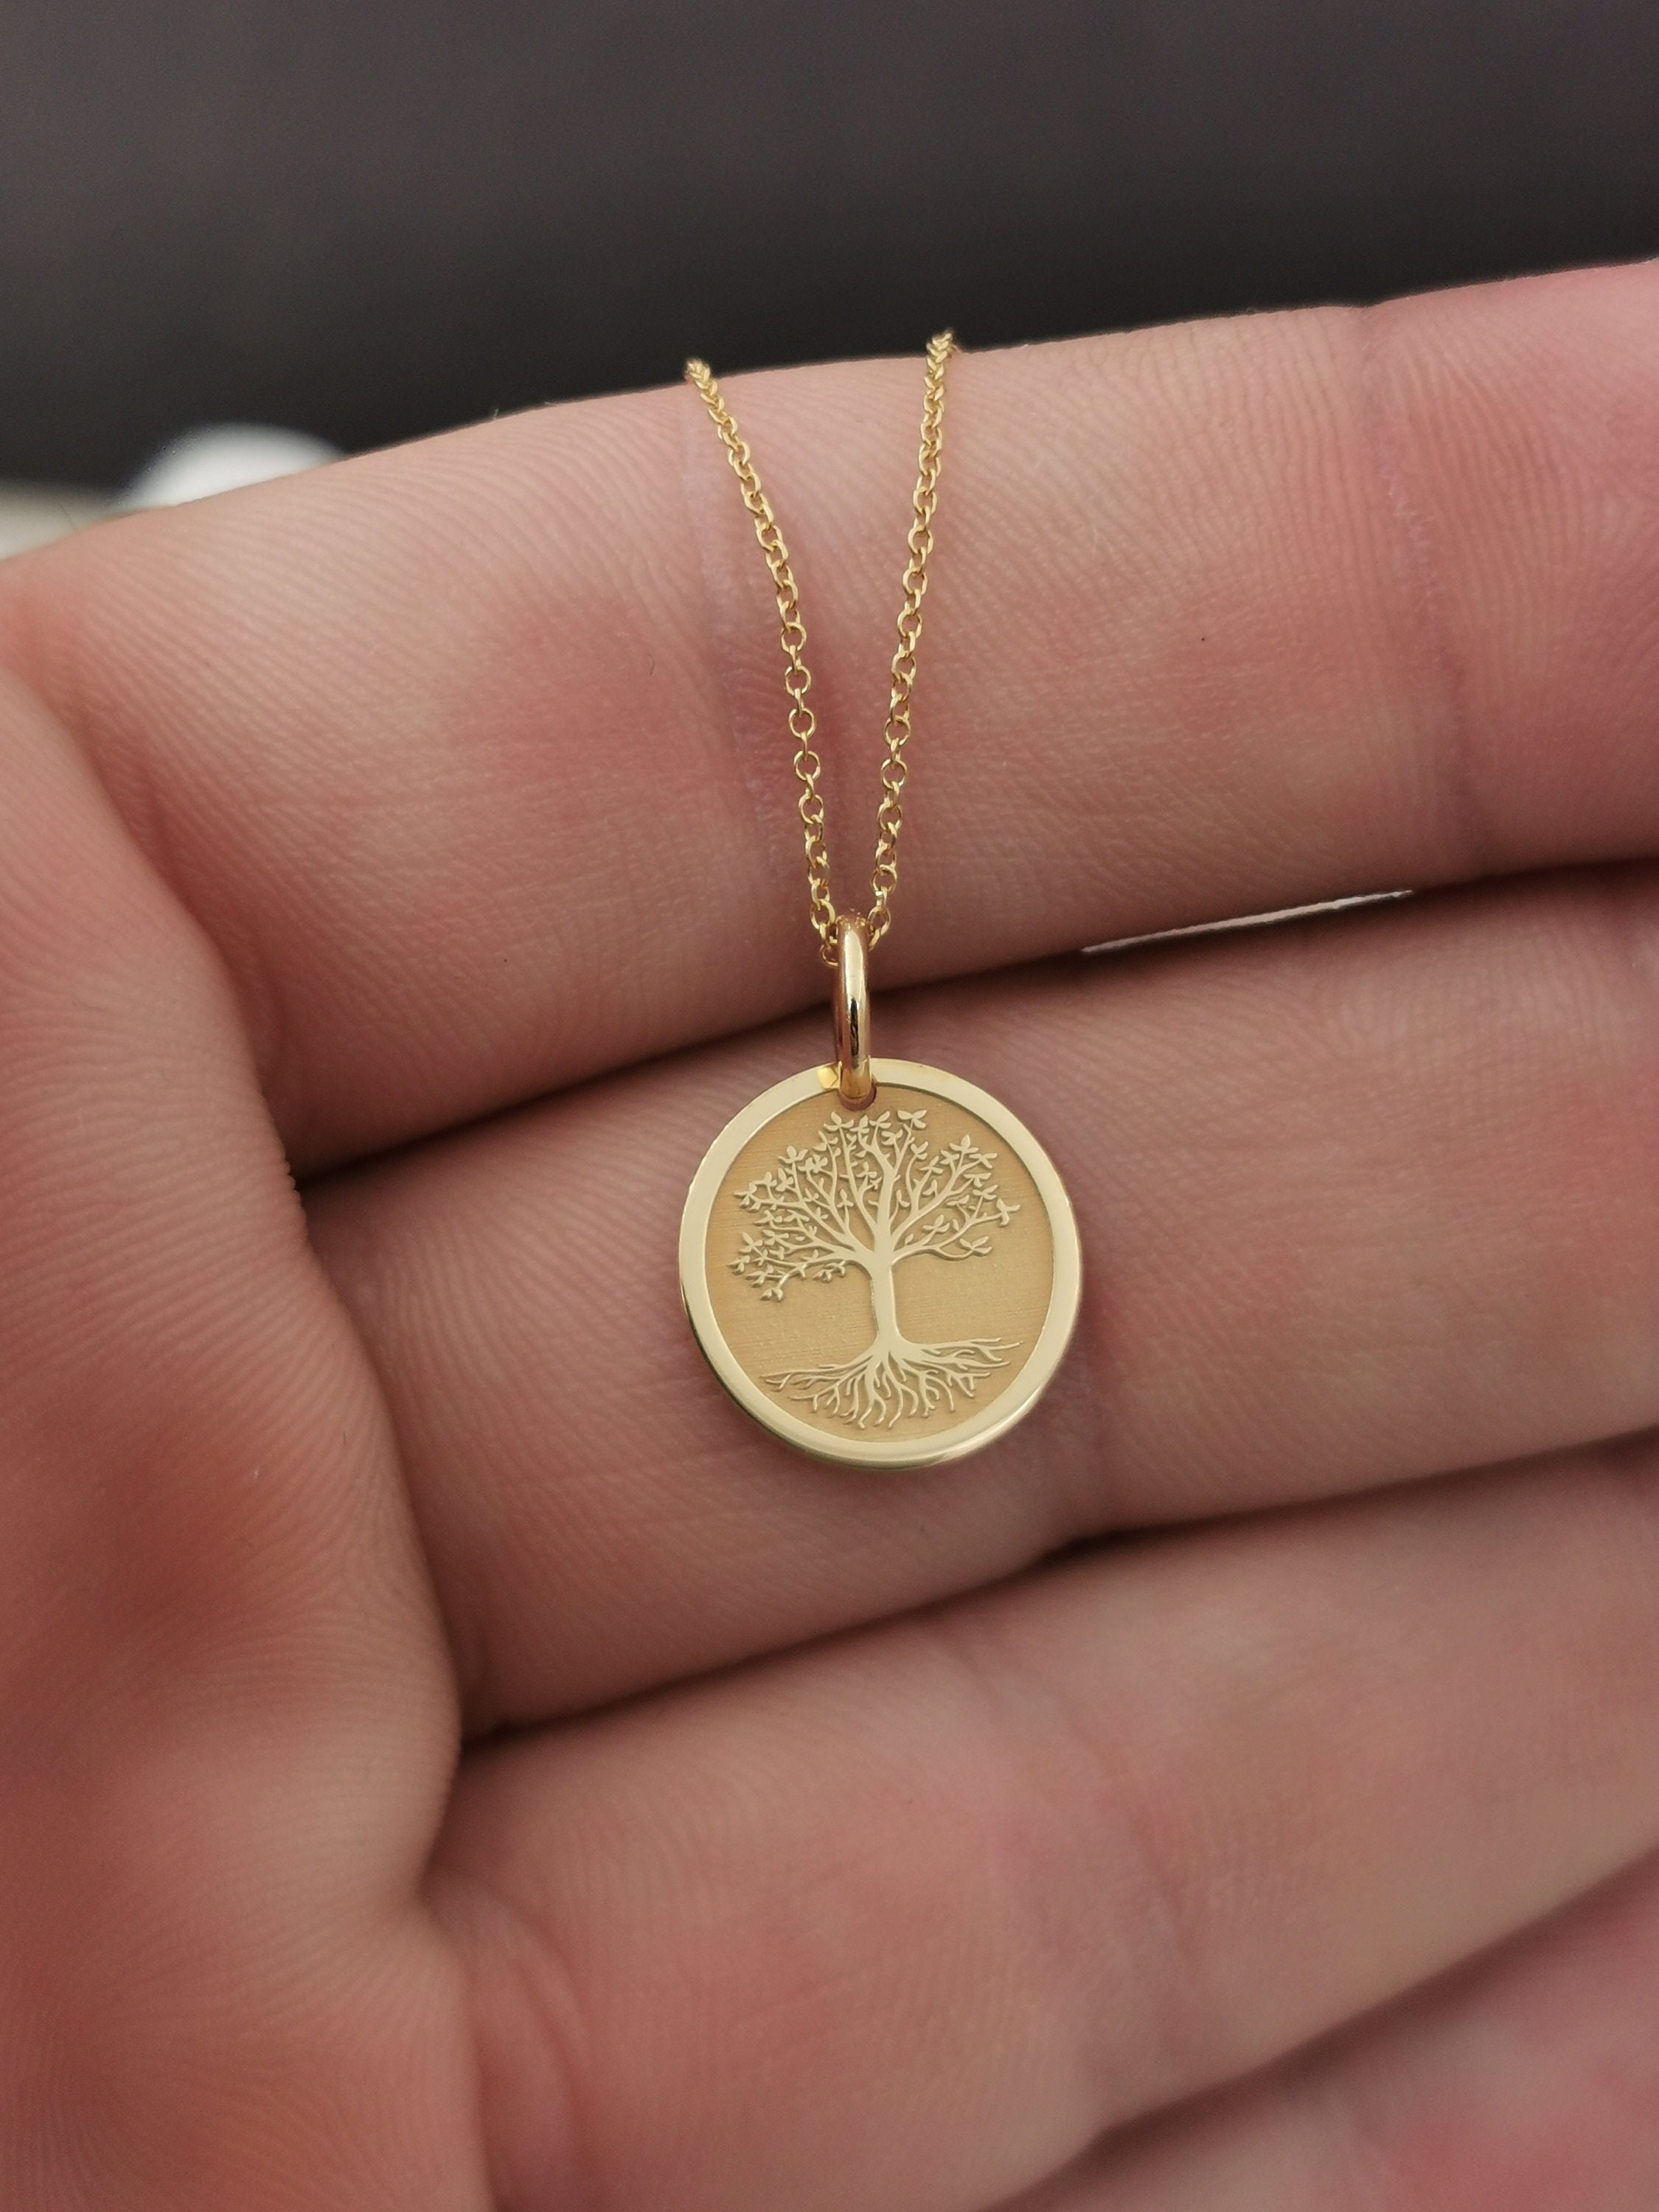 Dainty 14K Solid Gold Tree Of Life Necklace, Custom Necklace, Personalized Of Life Necklace